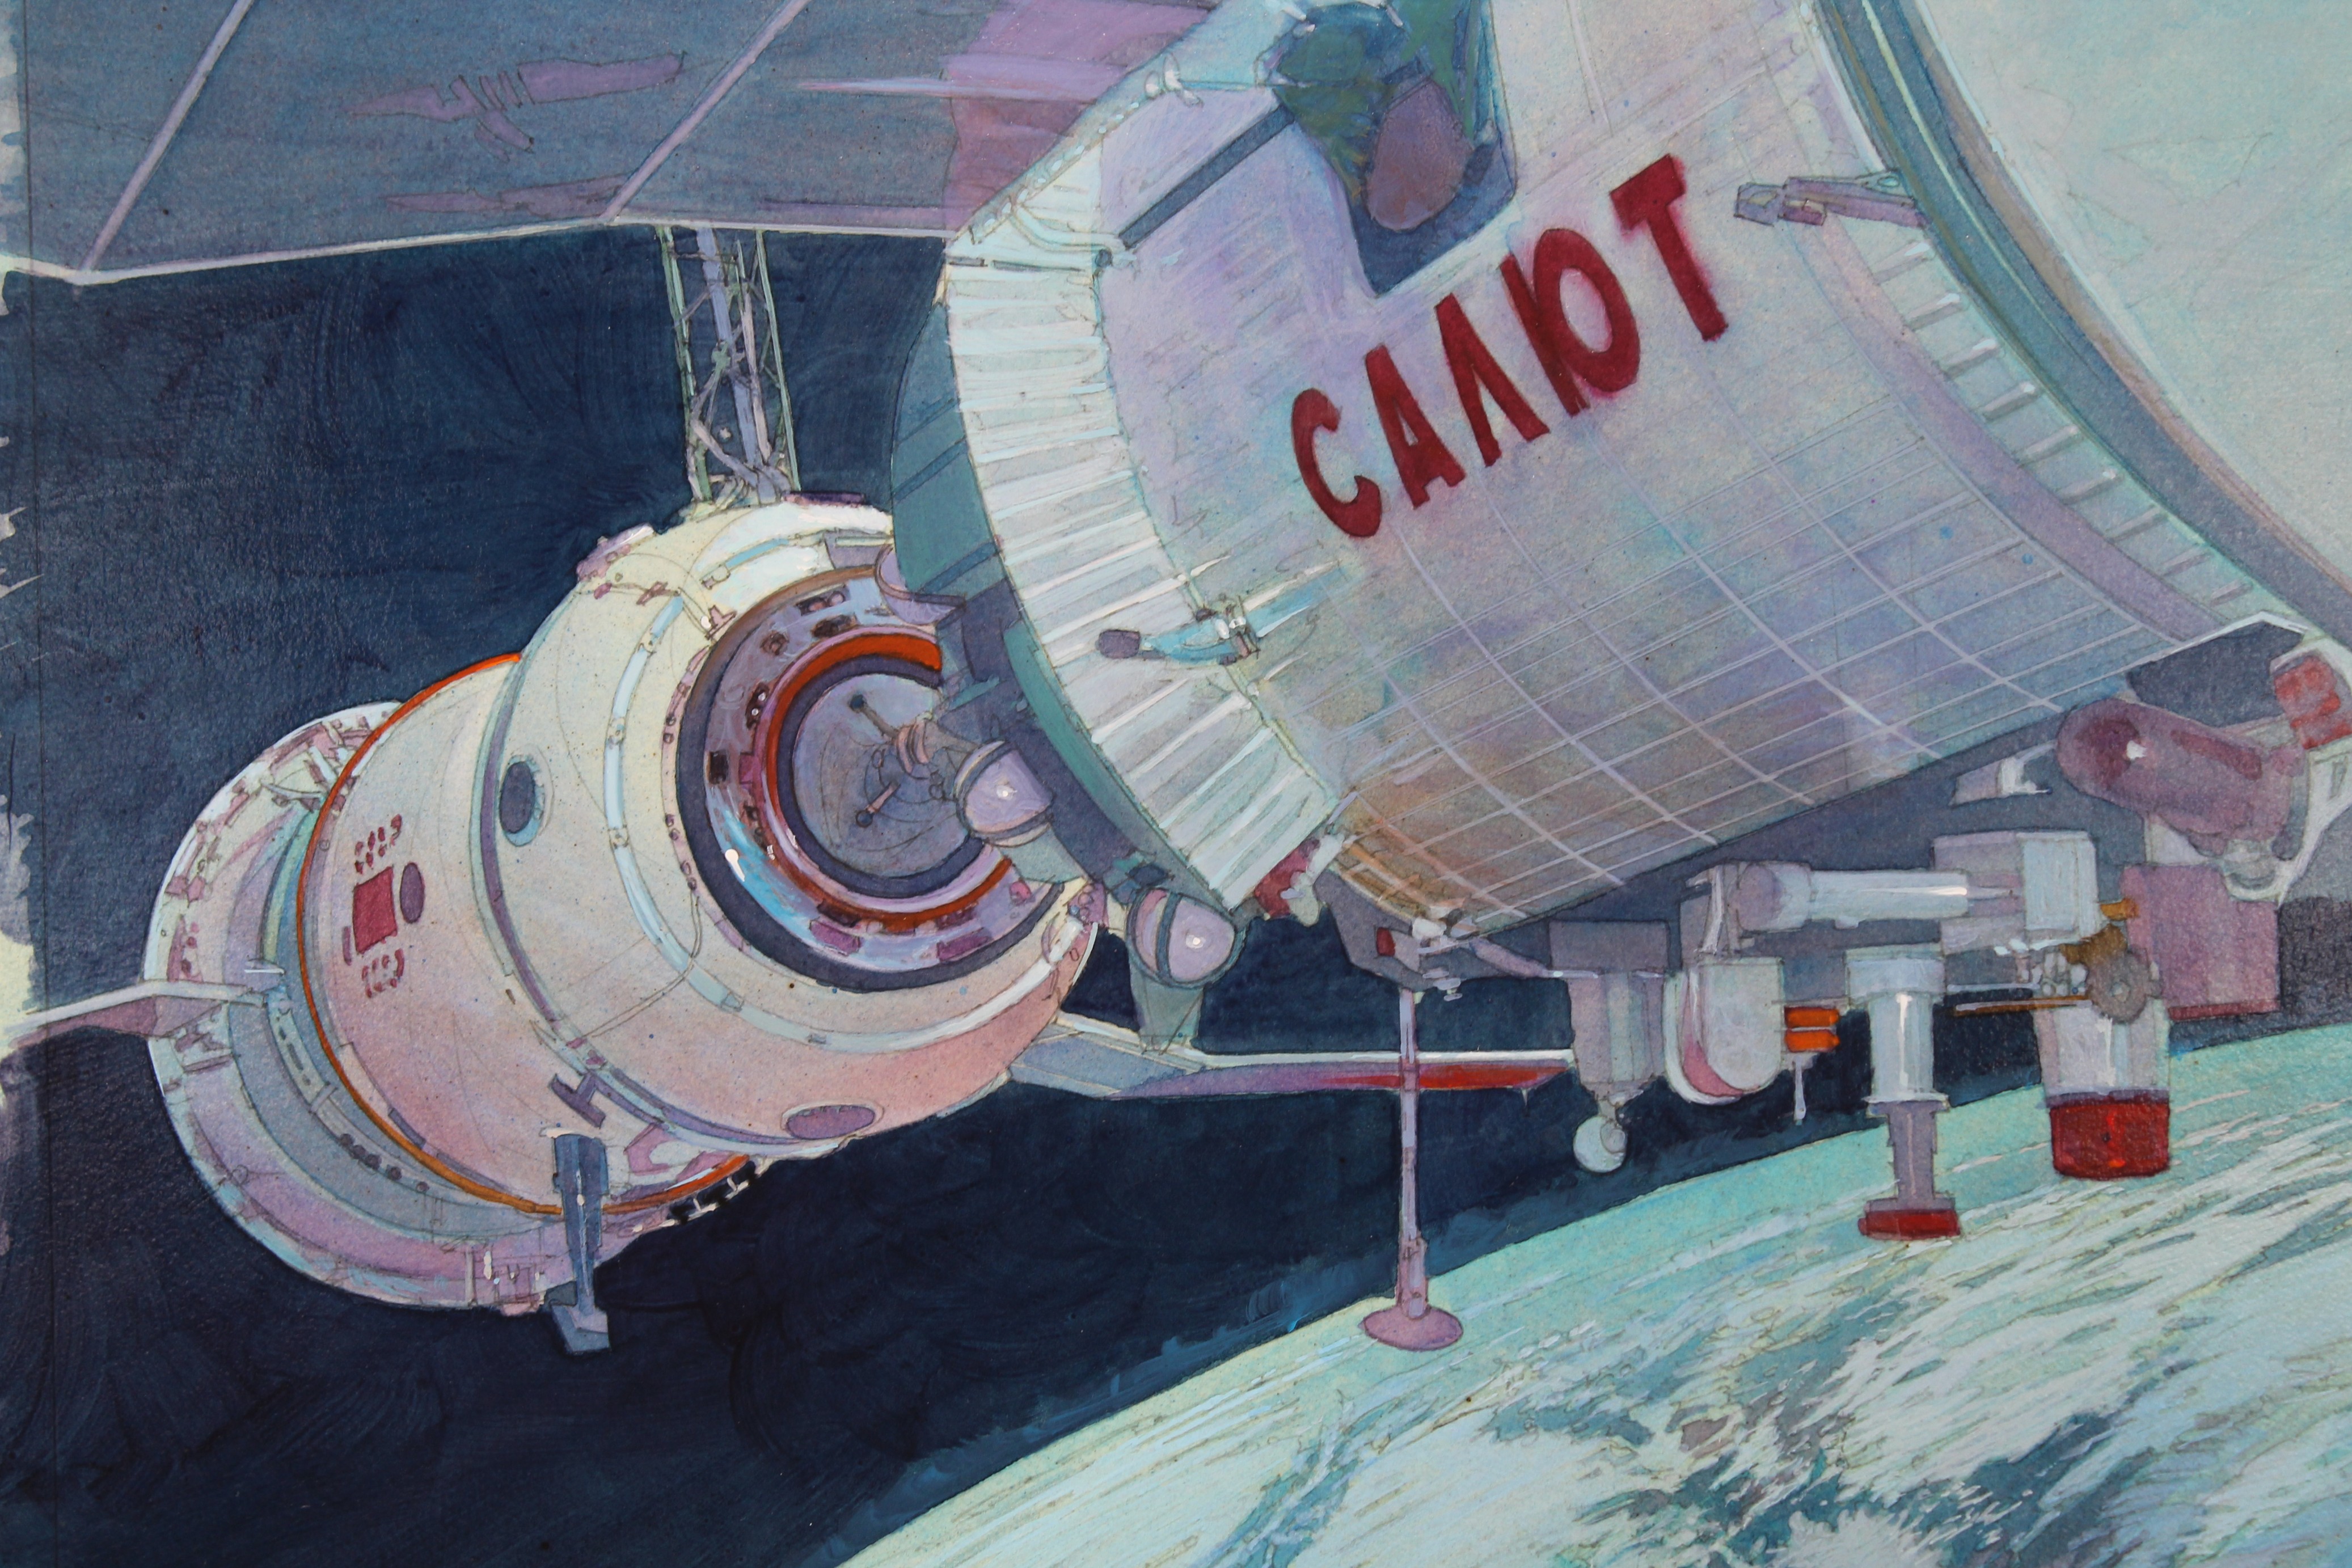 Mark Schuler (B. 1951) "First Space Station Crew" - Image 3 of 5